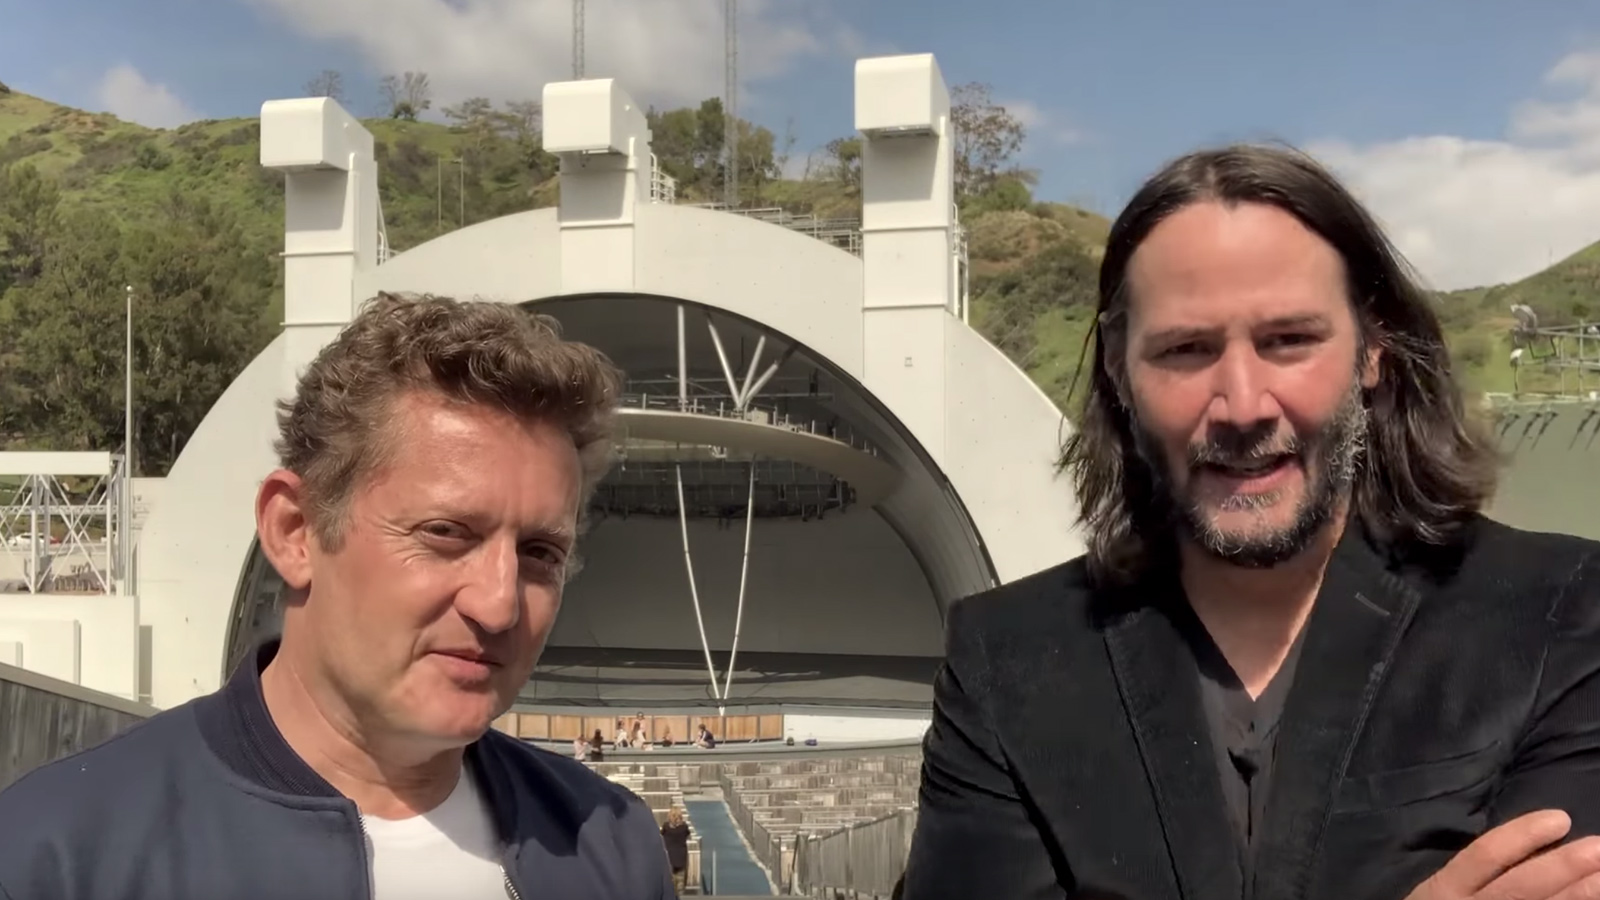 See Keanu Reeves, Alex Winter Announce New 'Bill & Ted' Movie Coming in 2020 | Revolver